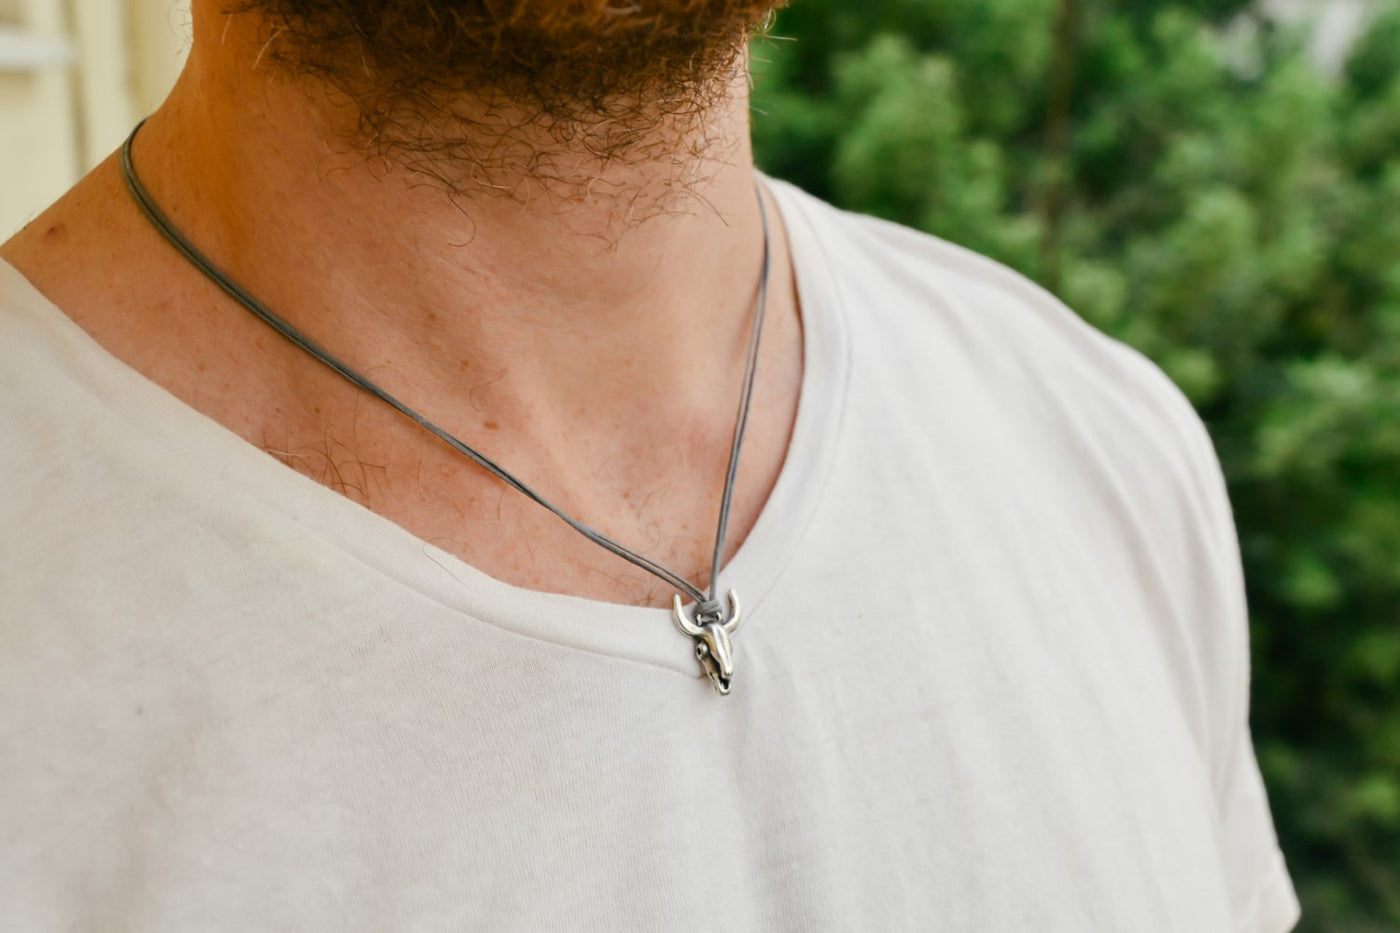 Bull's head necklace for men, men's bull head necklace with gray